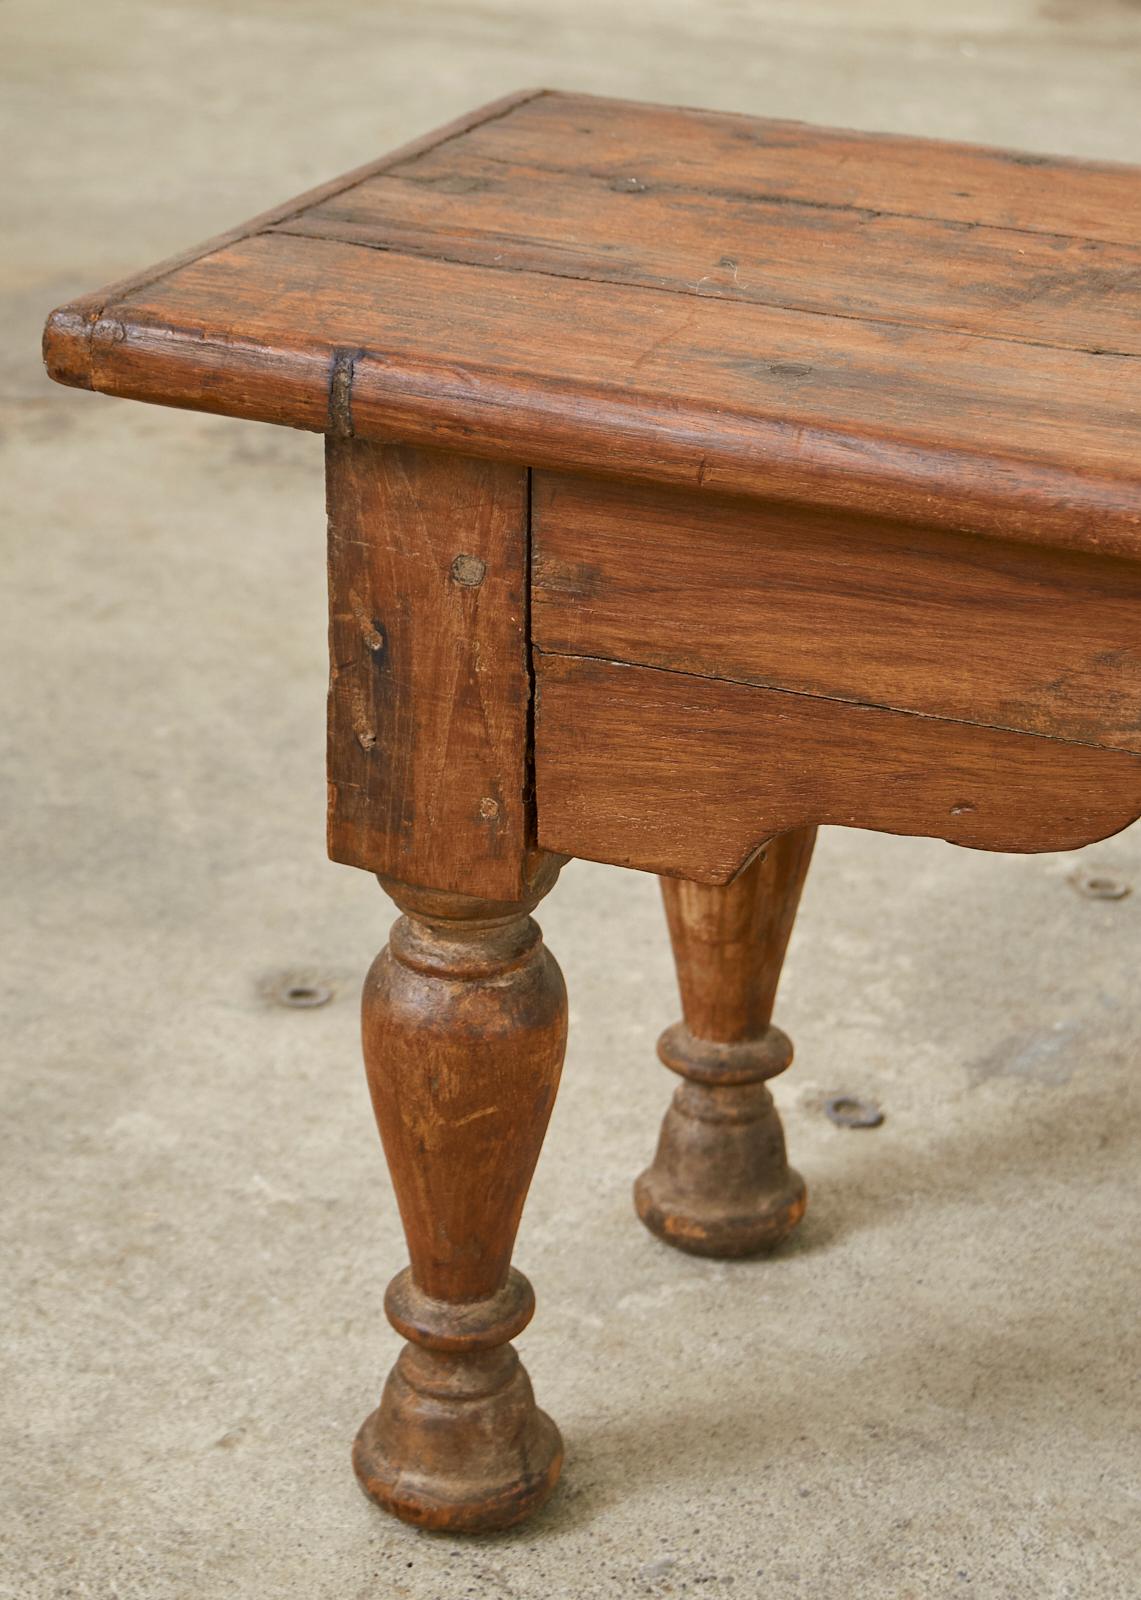 19th Century British Colonial Hardwood Low Table or Bench 8